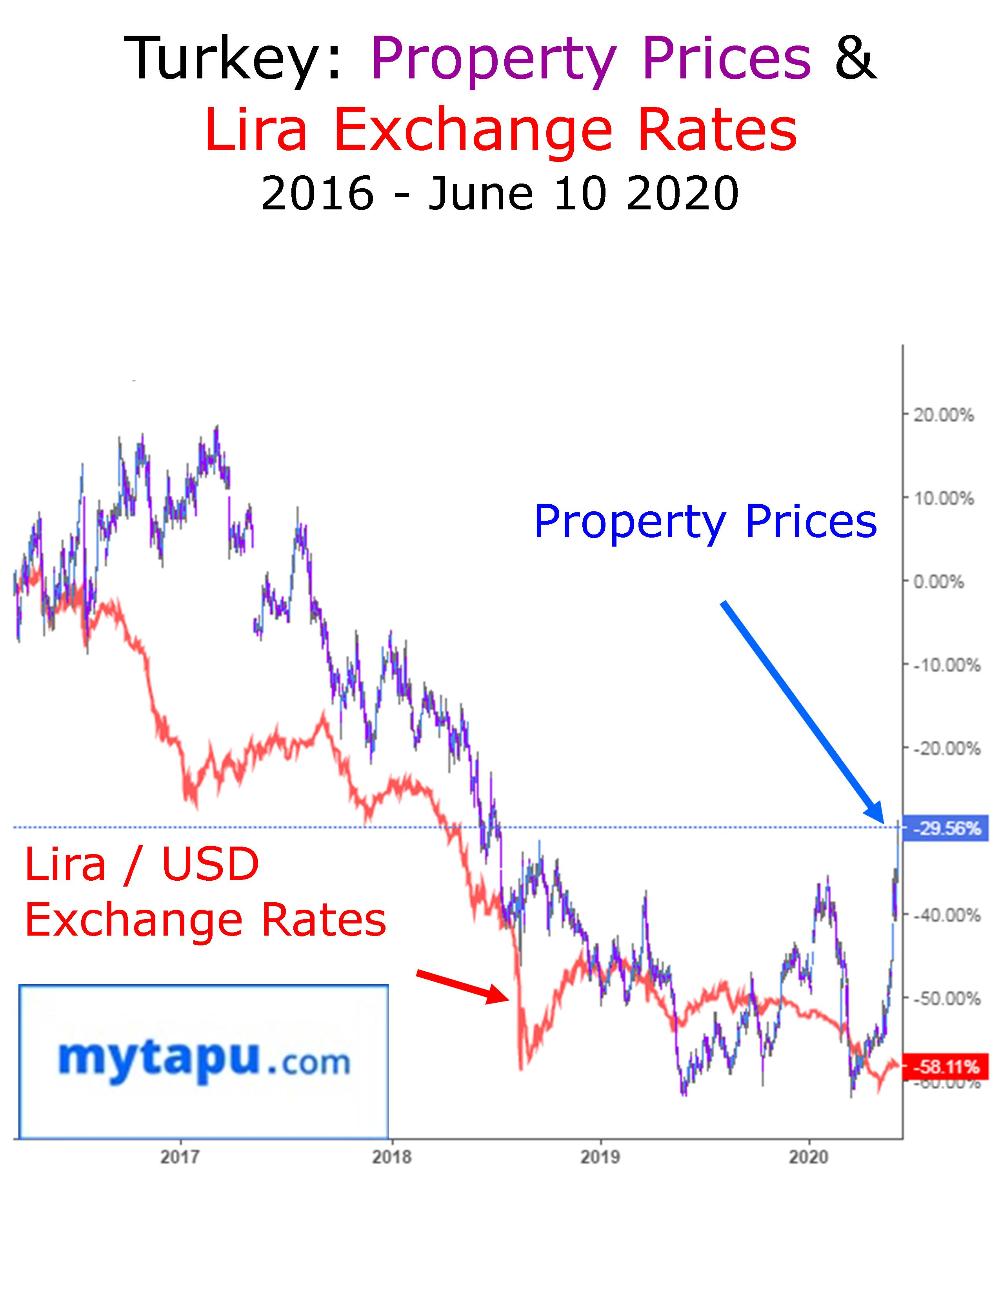 Turkey Property Prices and Exchange Rates 2016 - June 2020 Graphic Chart eng